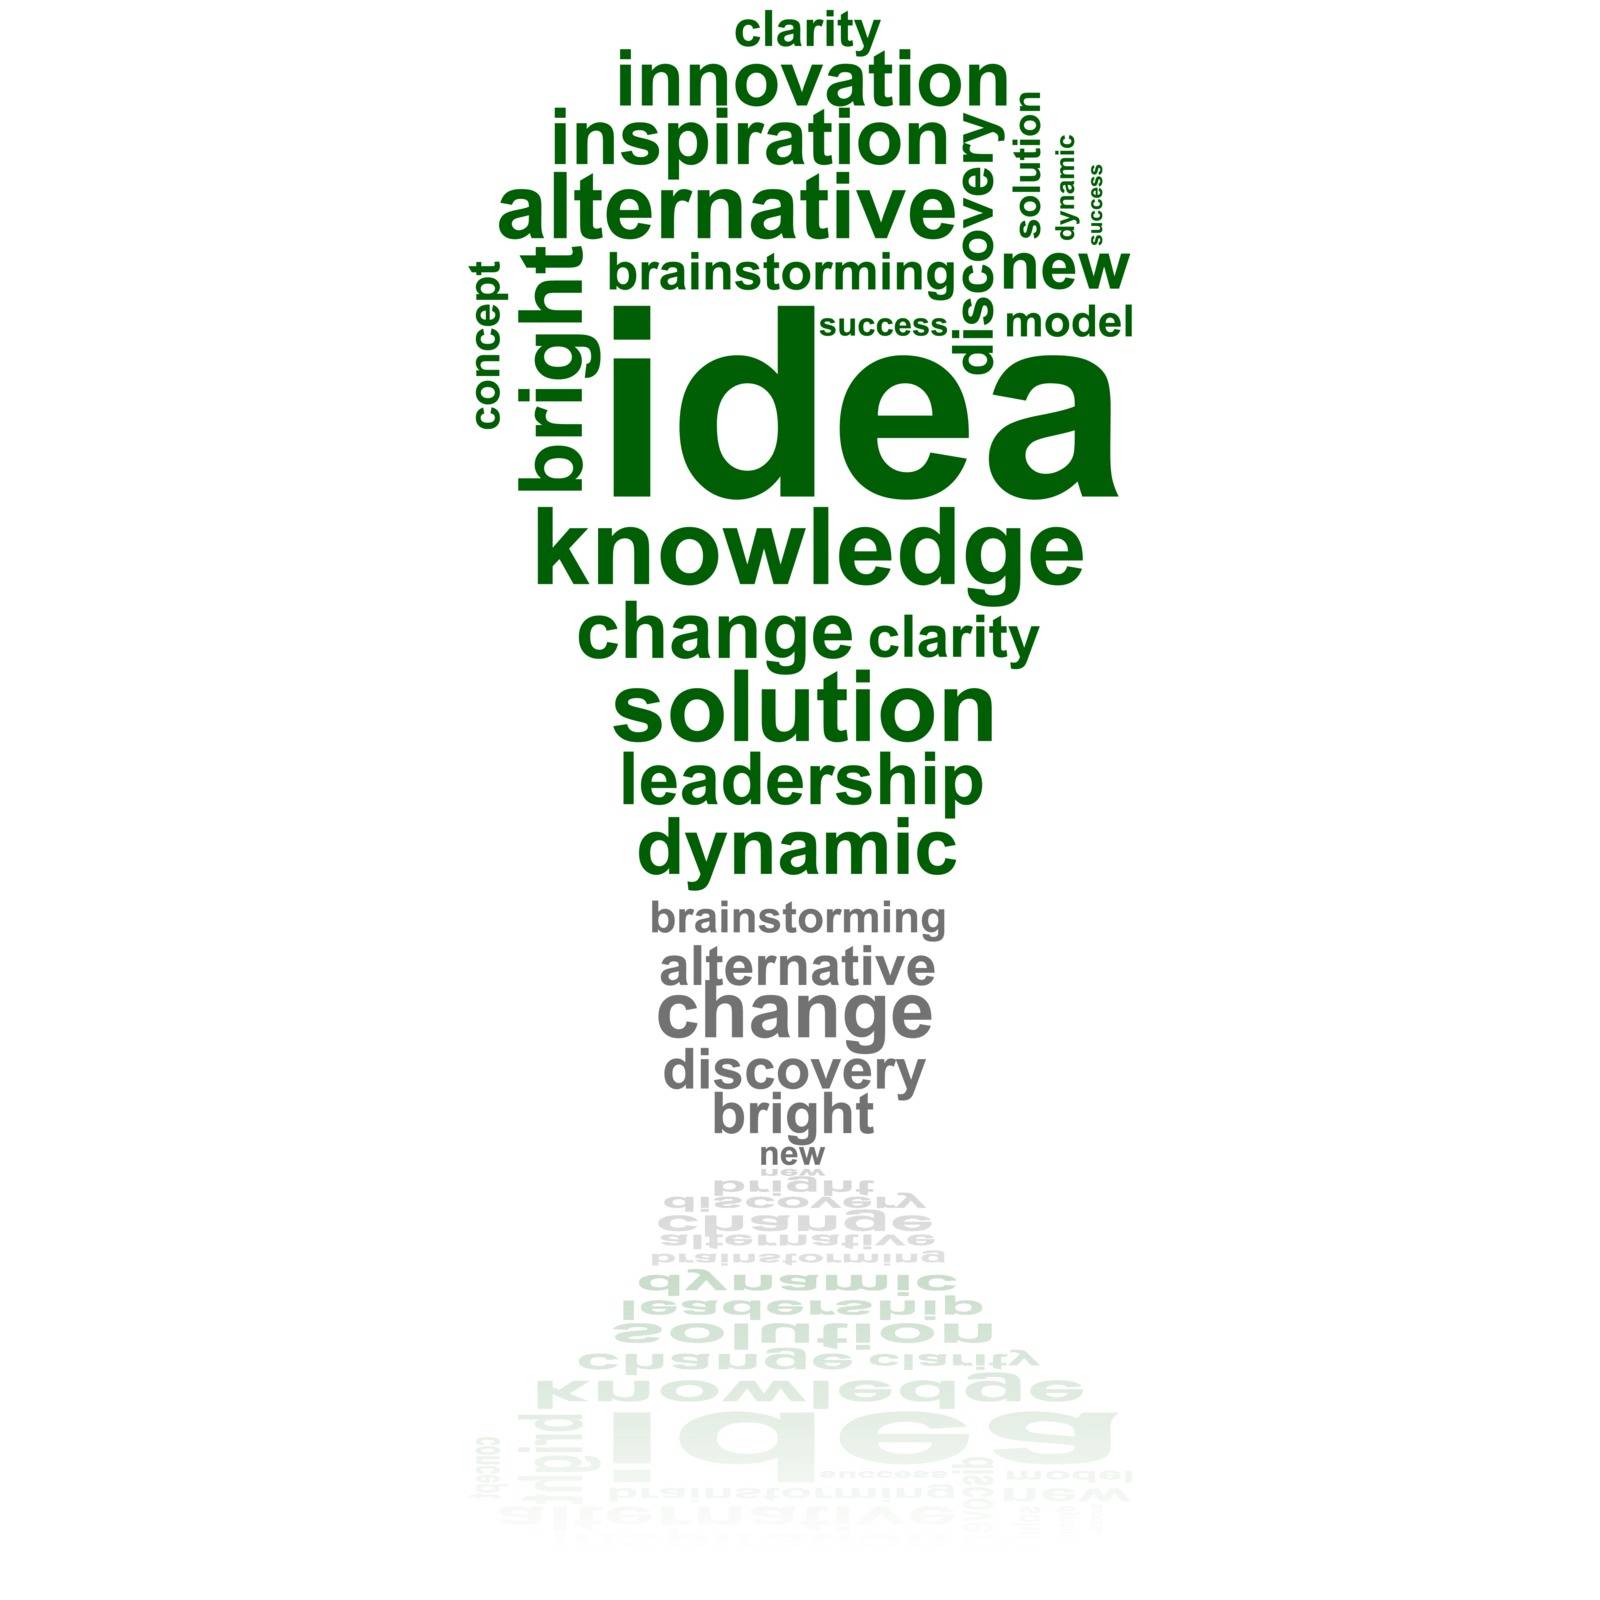 Concept illustration showing a light bulb made up of words related to idea and inspiration